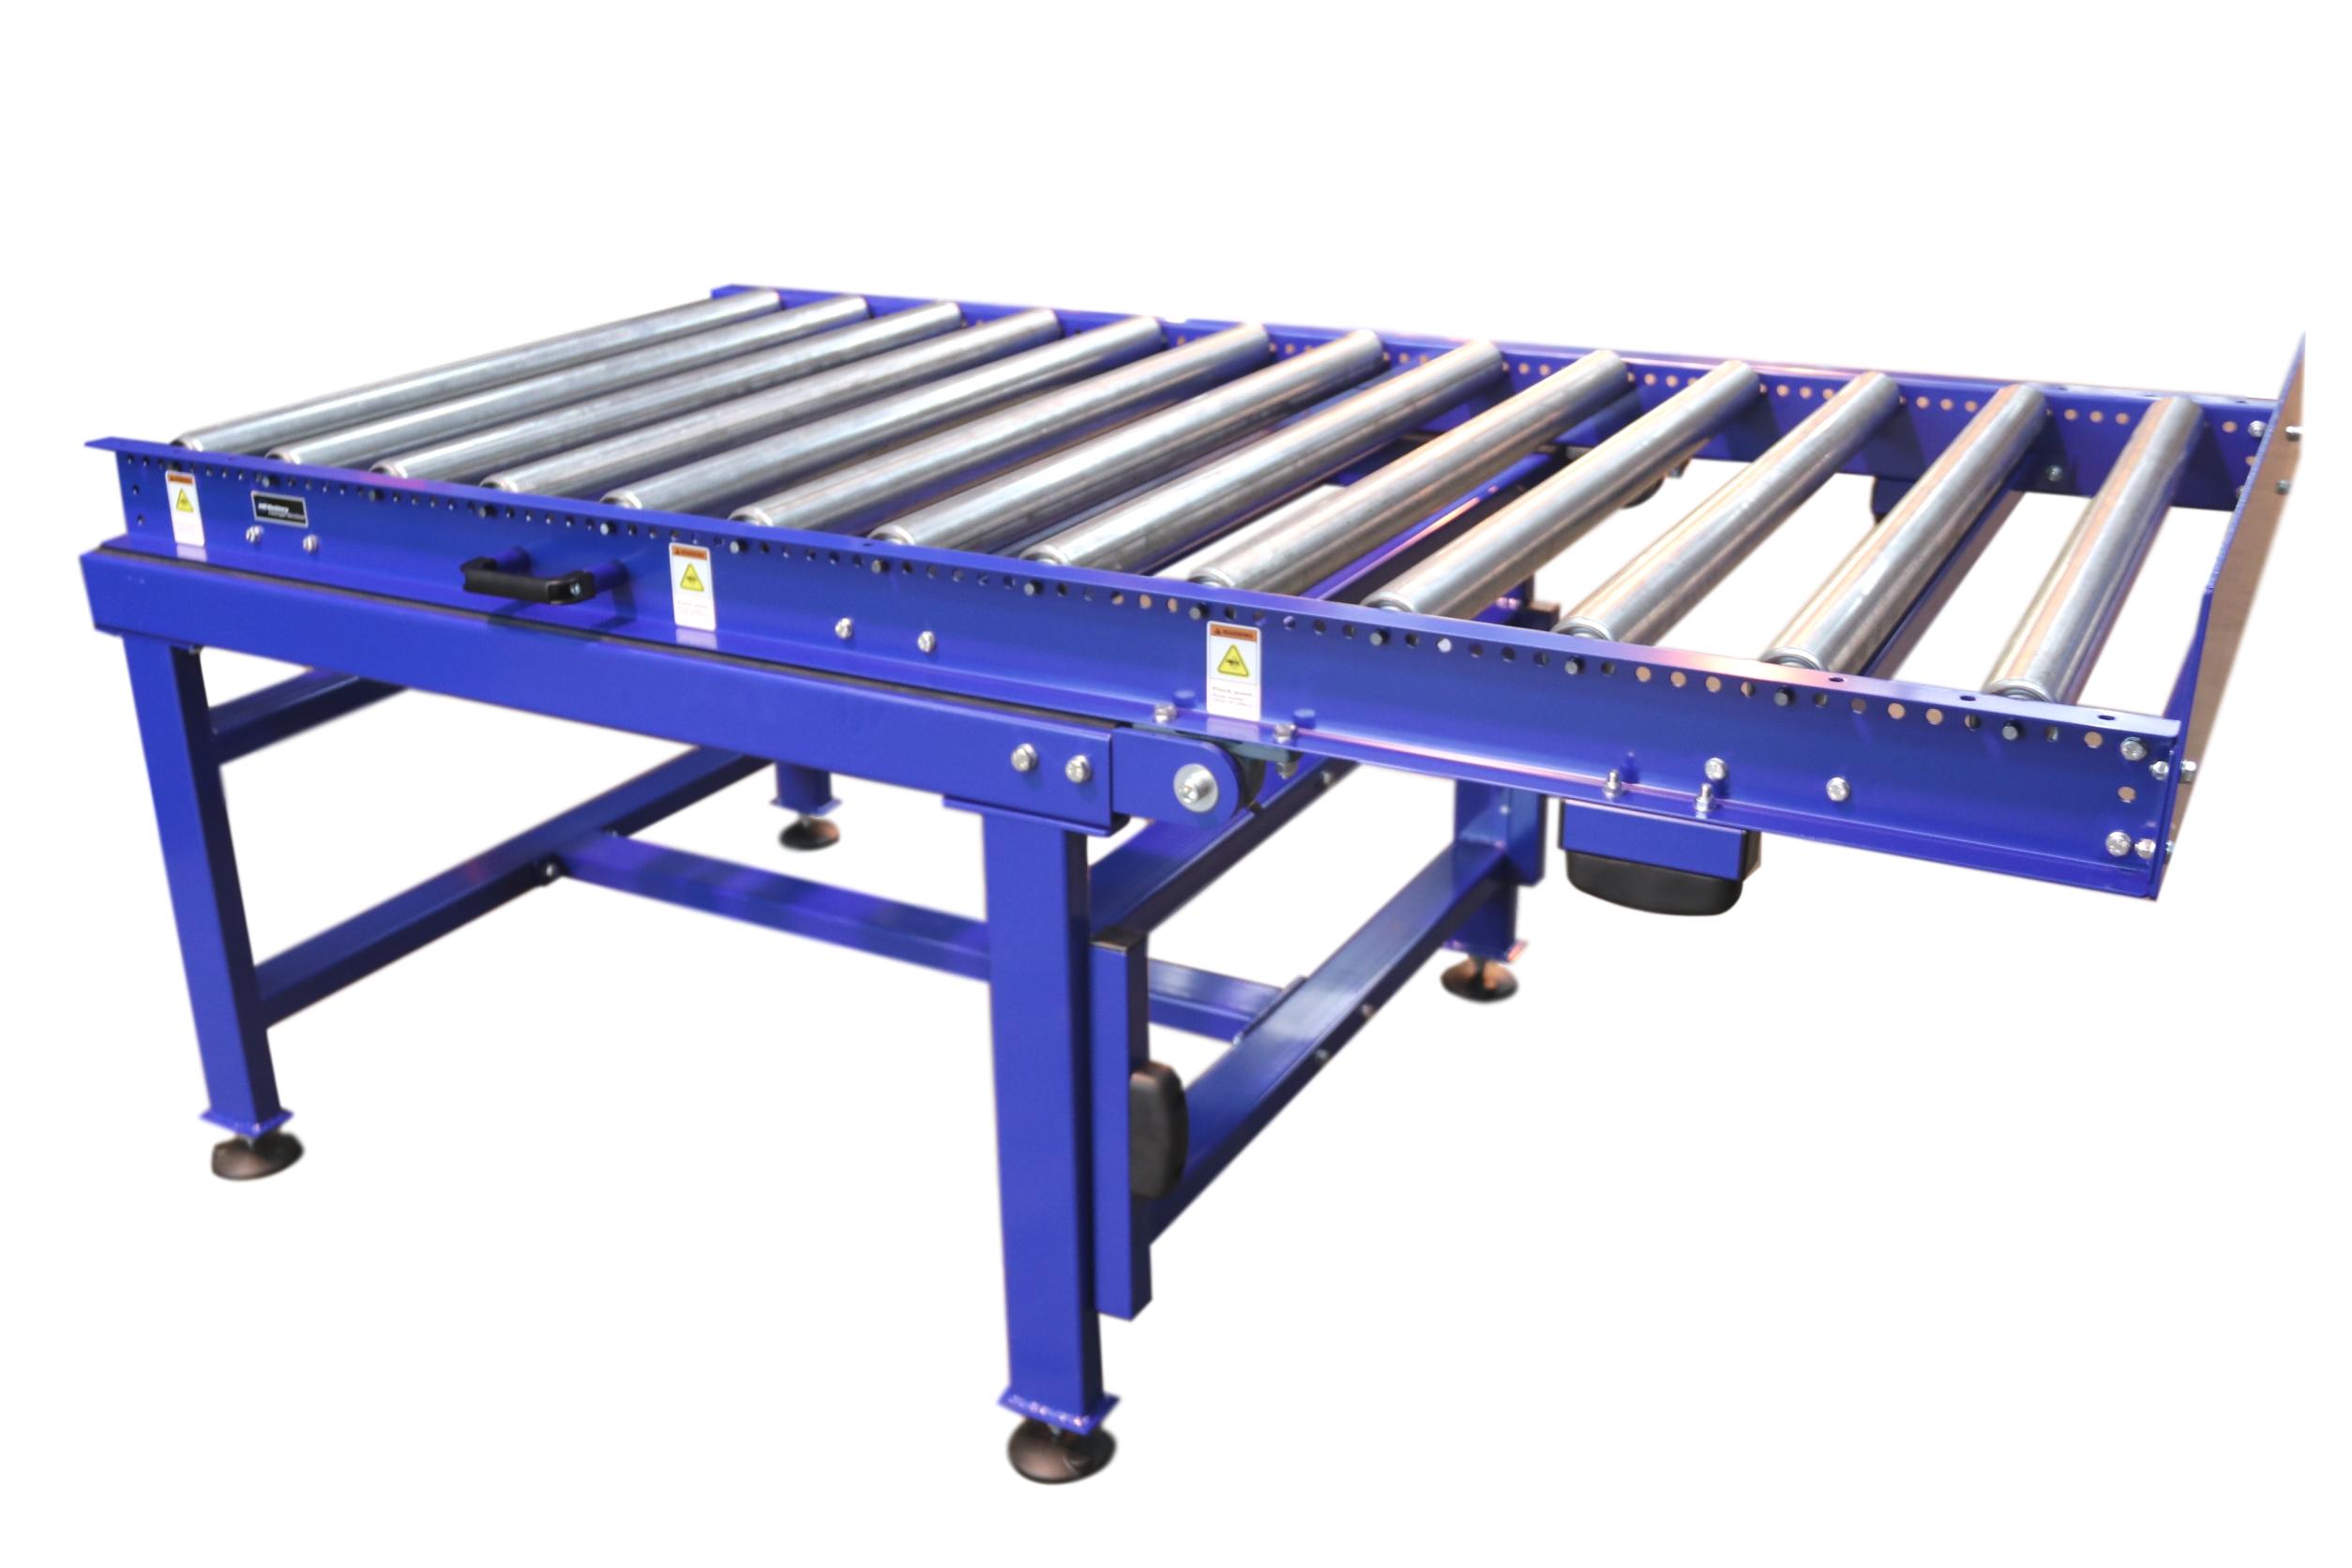 Custom gravity conveyor manufacturers and suppliers of bespoke roller conveyors and customized conveyor systems.